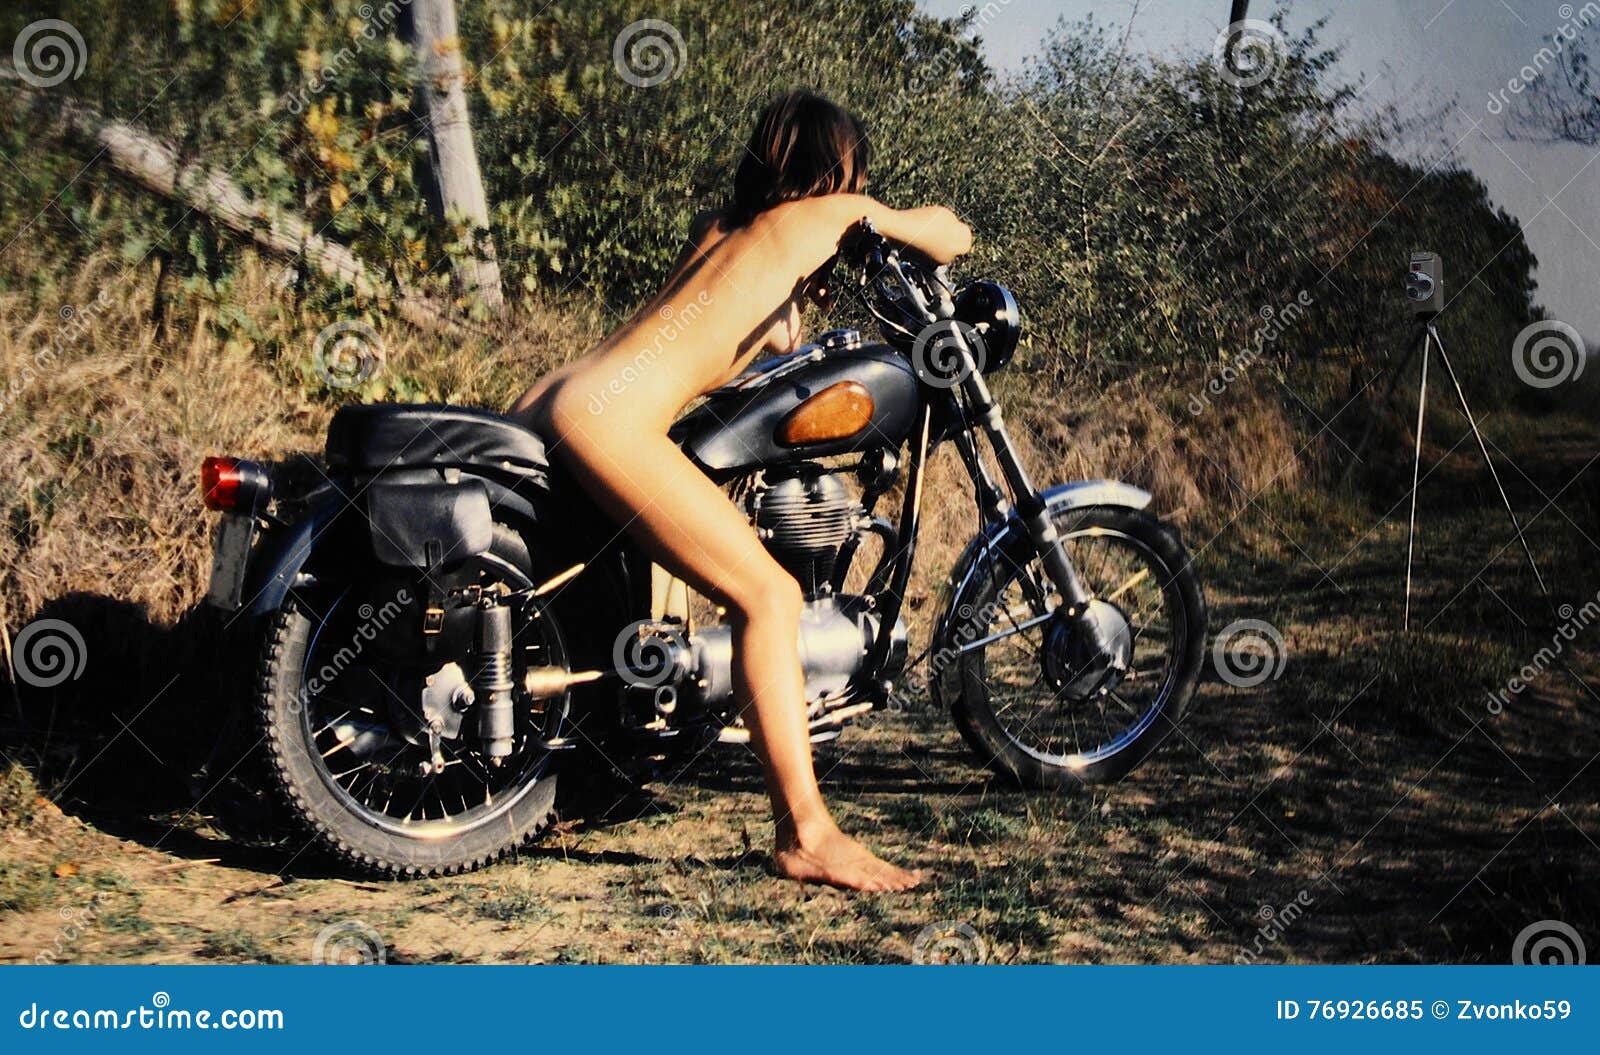 Best of Hot naked girls on motorcycles